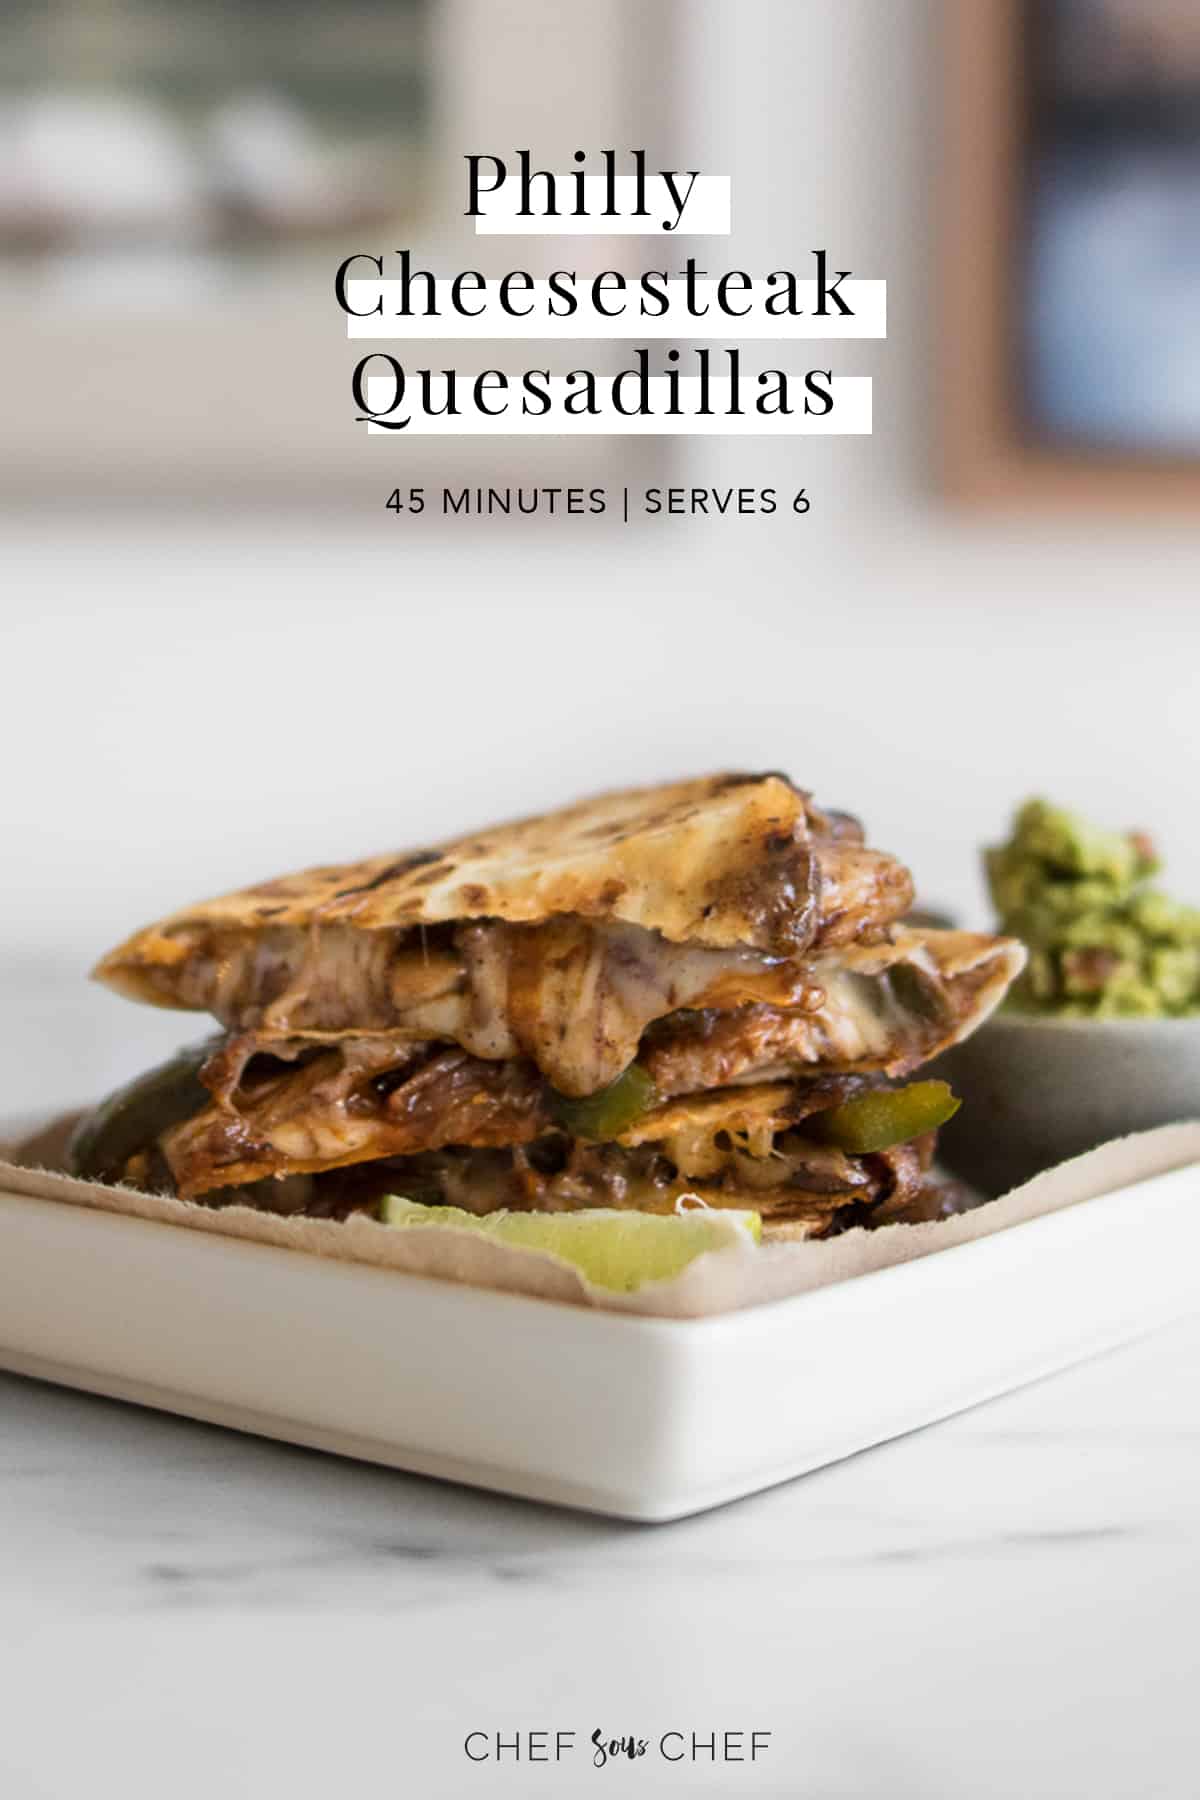 Philly Cheesesteak Quesadillas on a plate with guacamole and text overlay